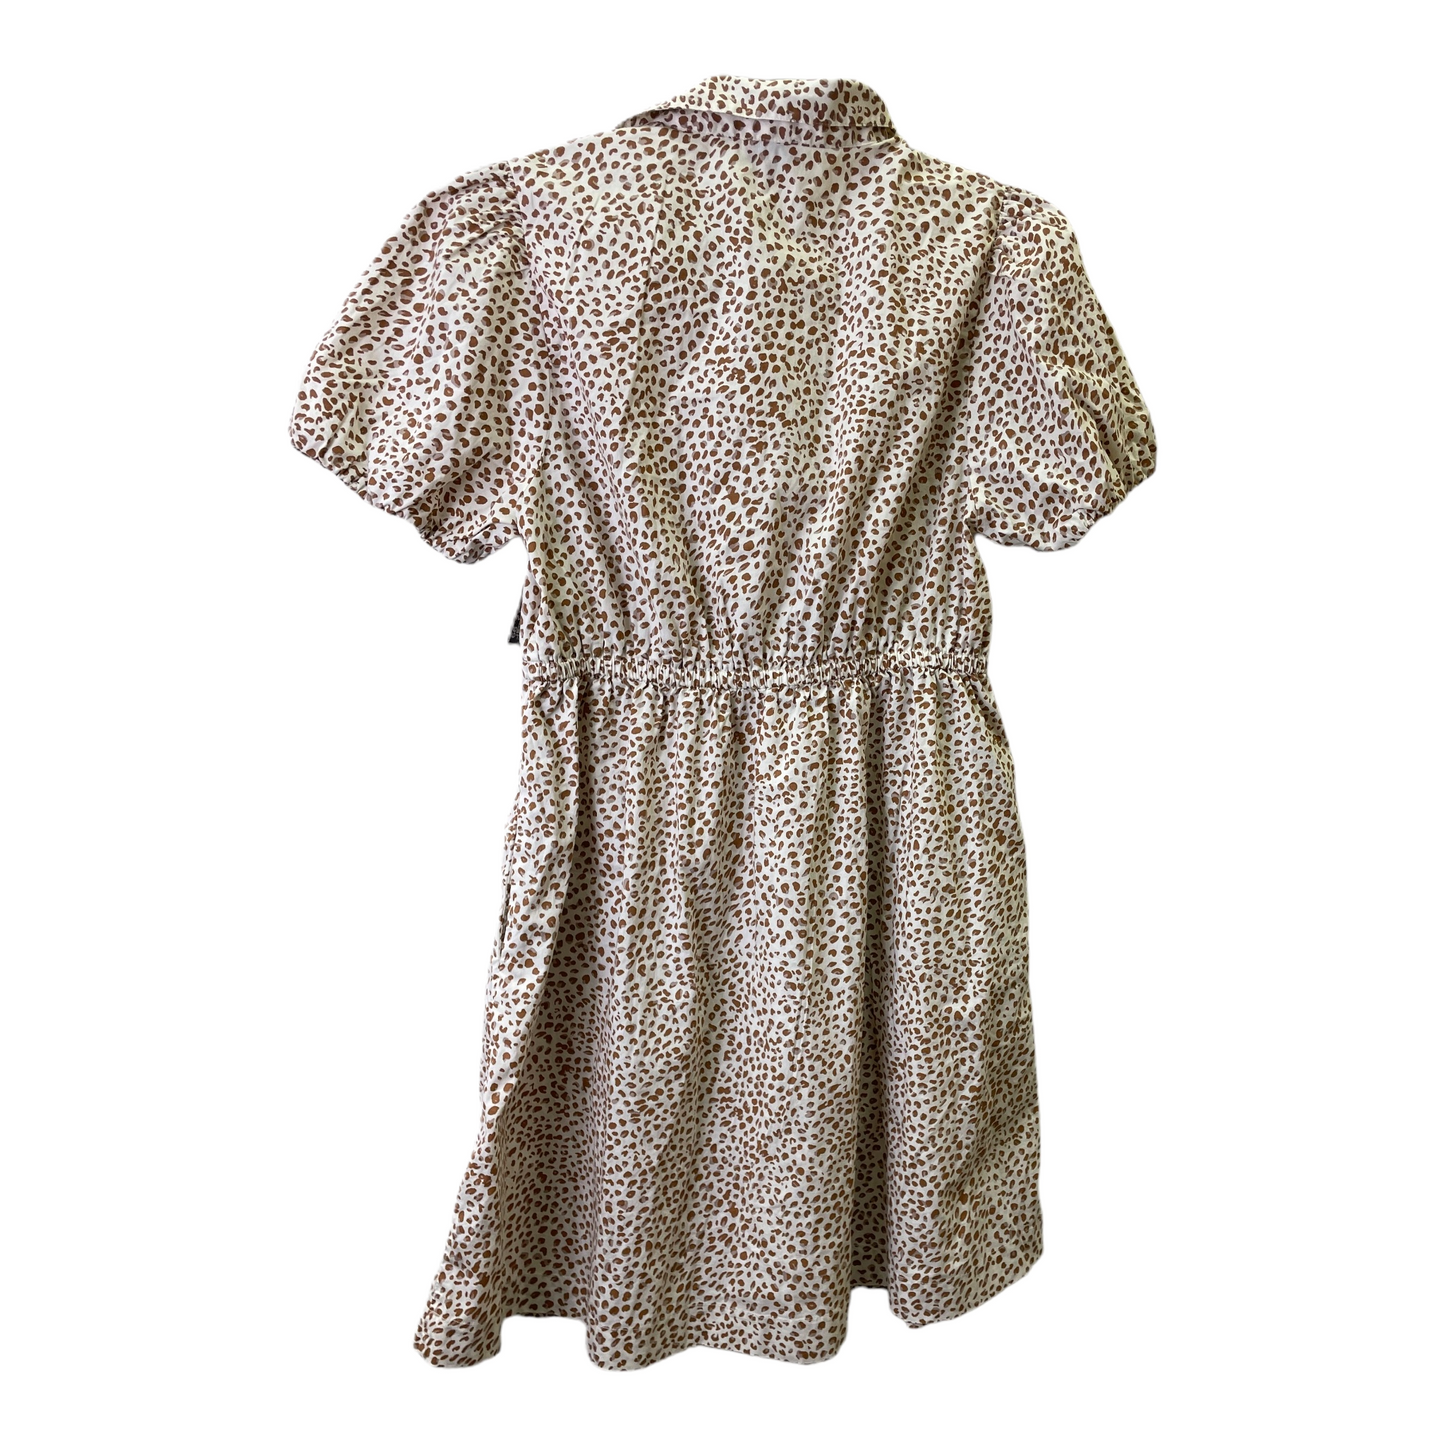 Brown & Cream Dress Casual Short By J. Crew, Size: M